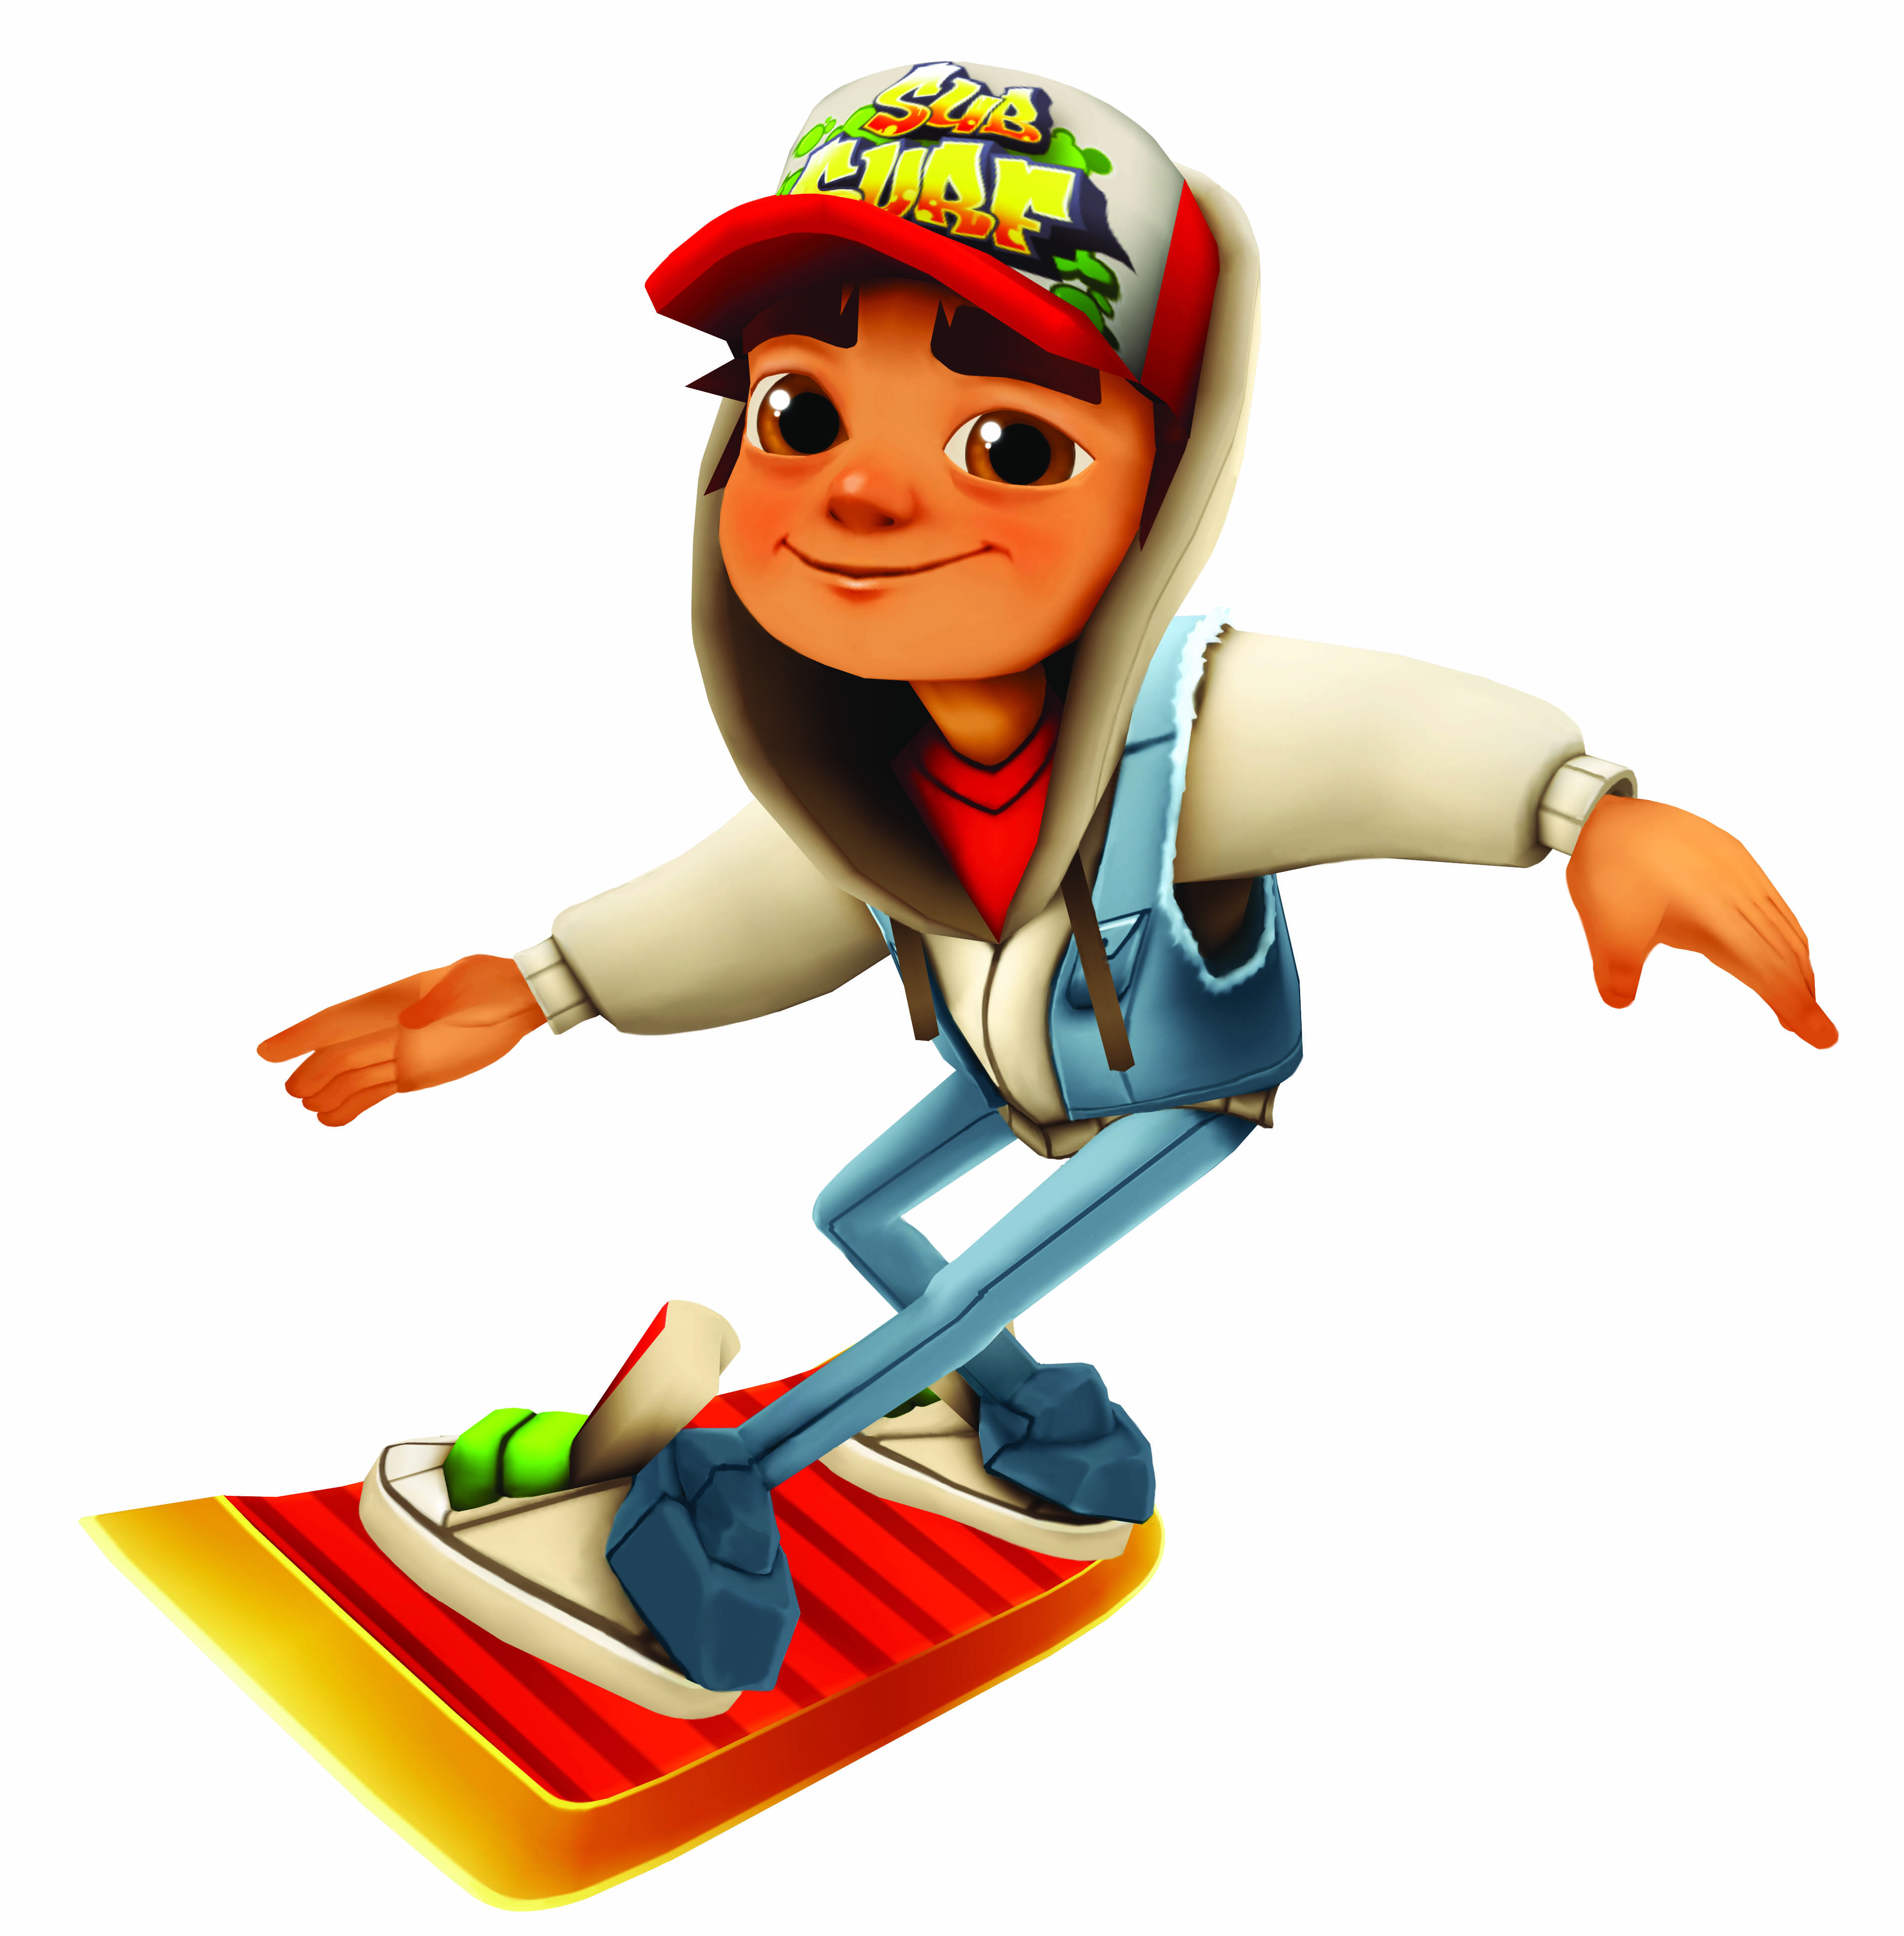 subway surfer free download for pc